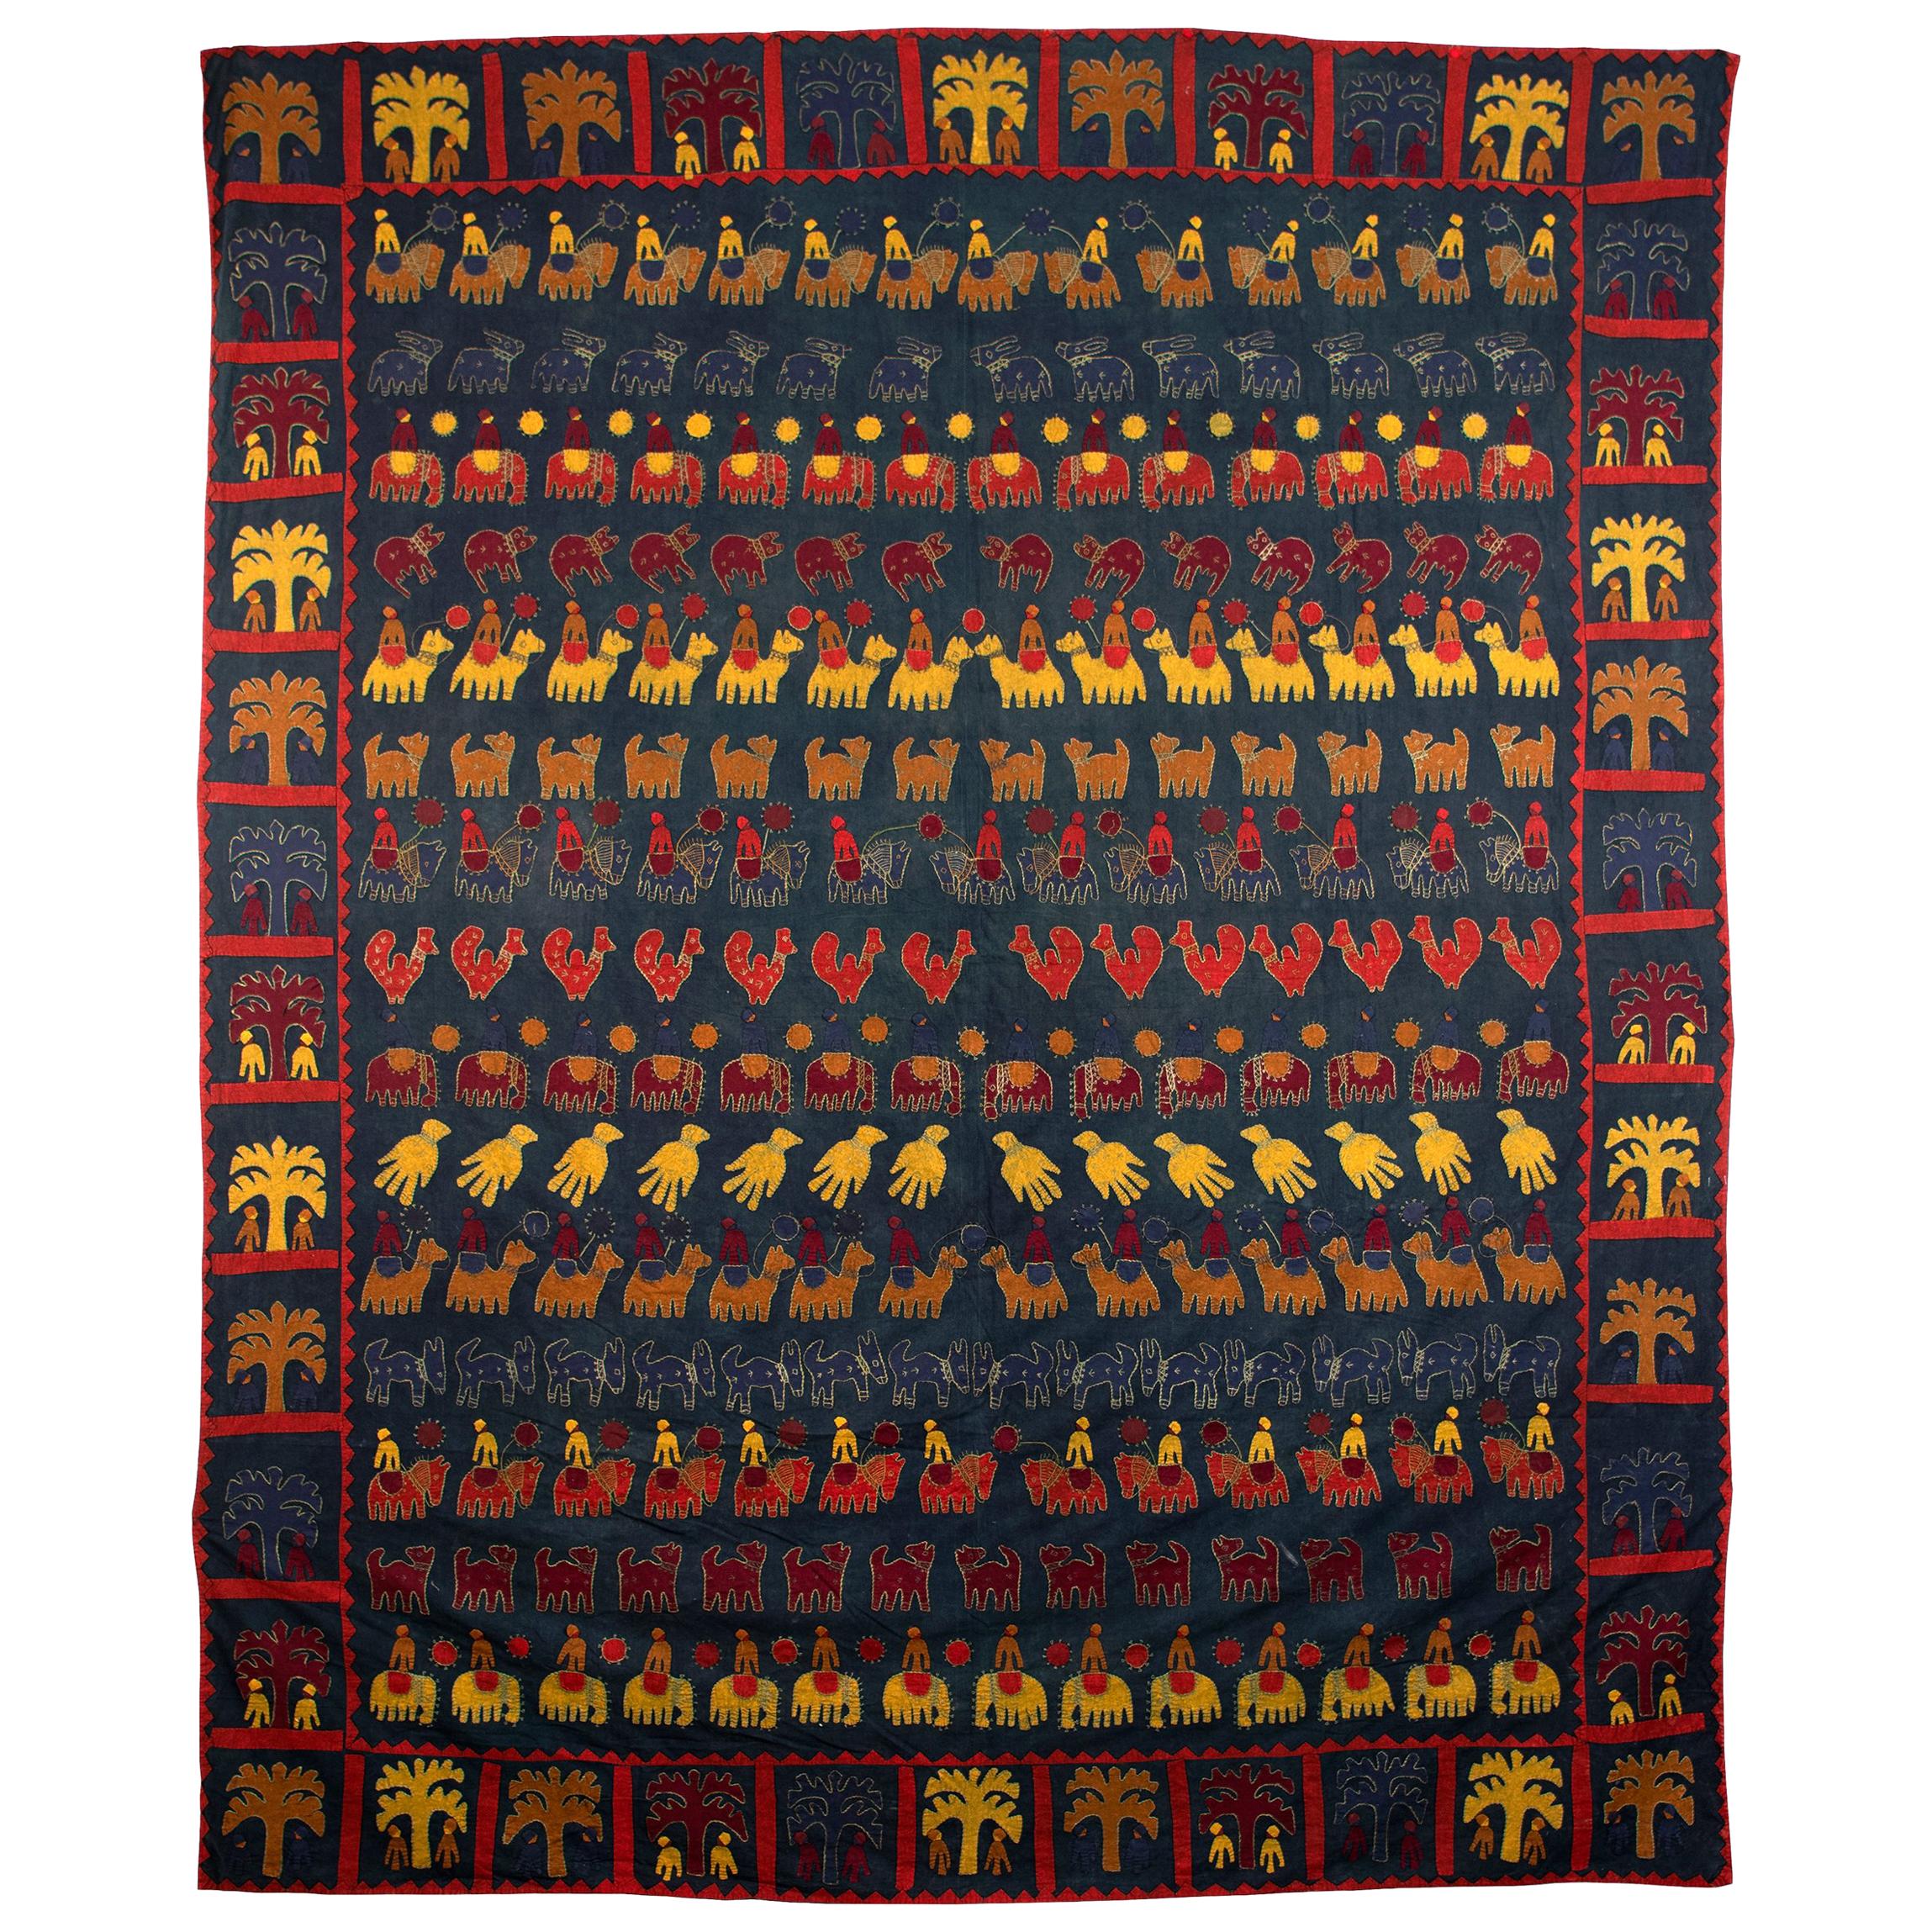 Extraordinary Indian Applique Wall Hanging Bedspread For Sale